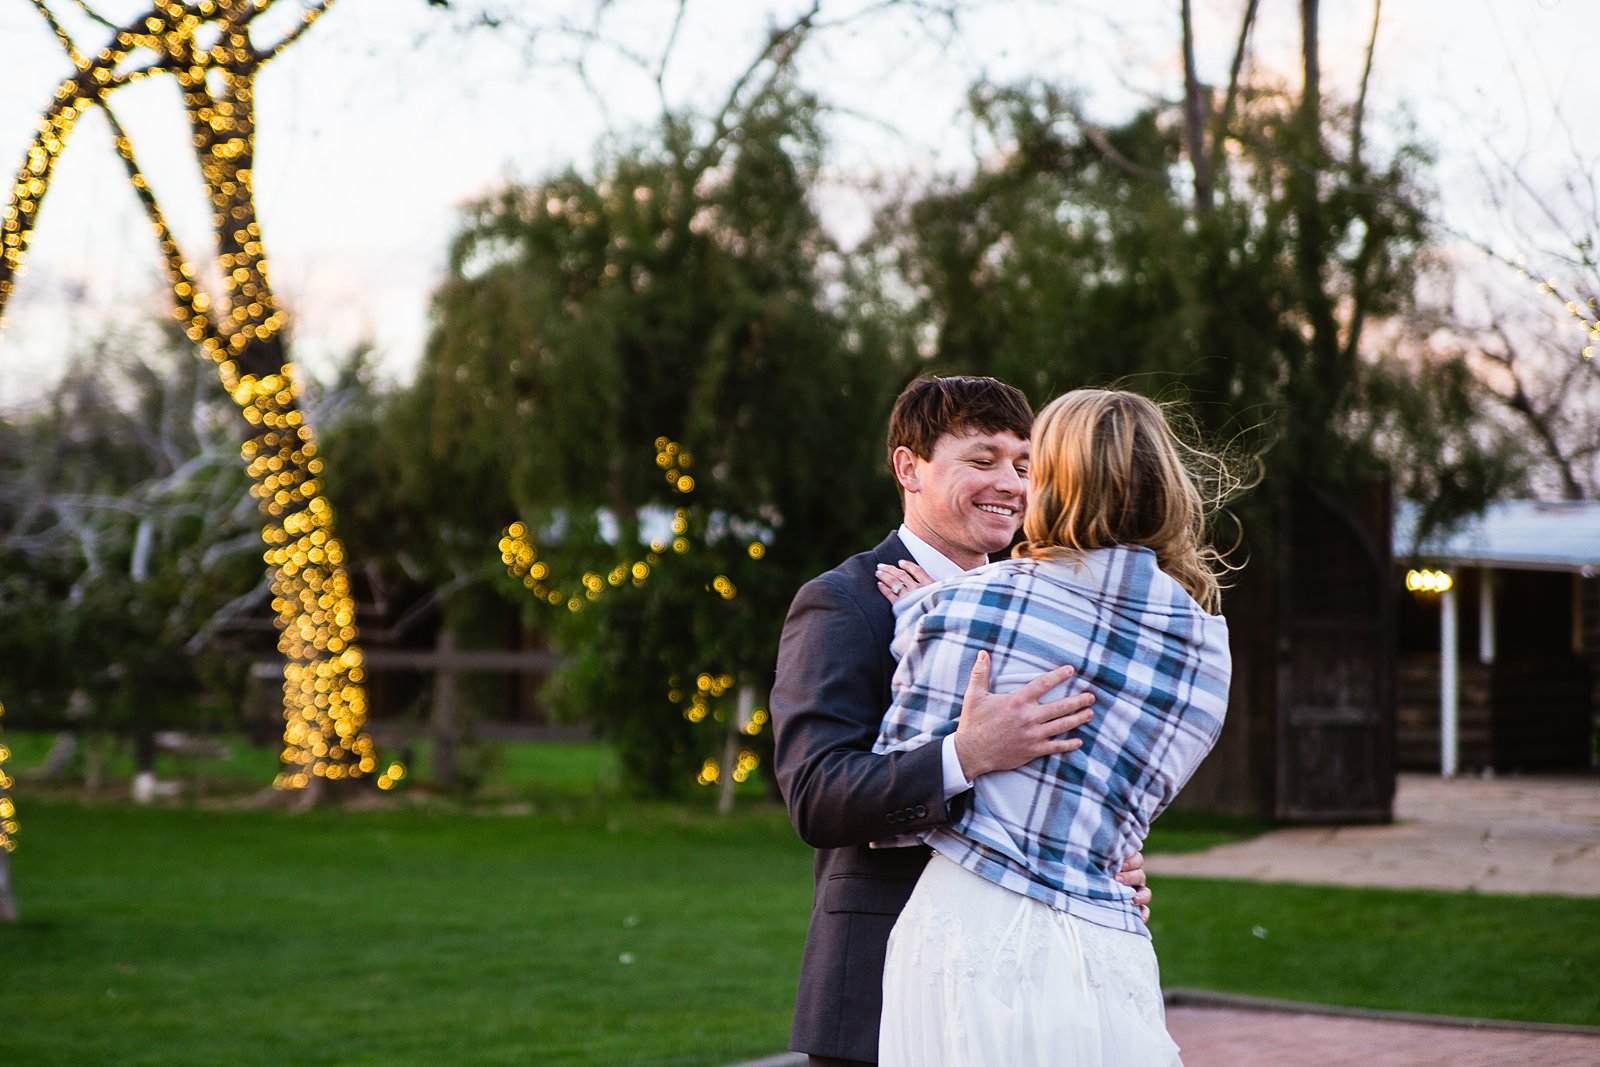 Bride and Groom sharing first dance at their Venue At The Grove wedding reception by Arizona wedding photographer PMA Photography.